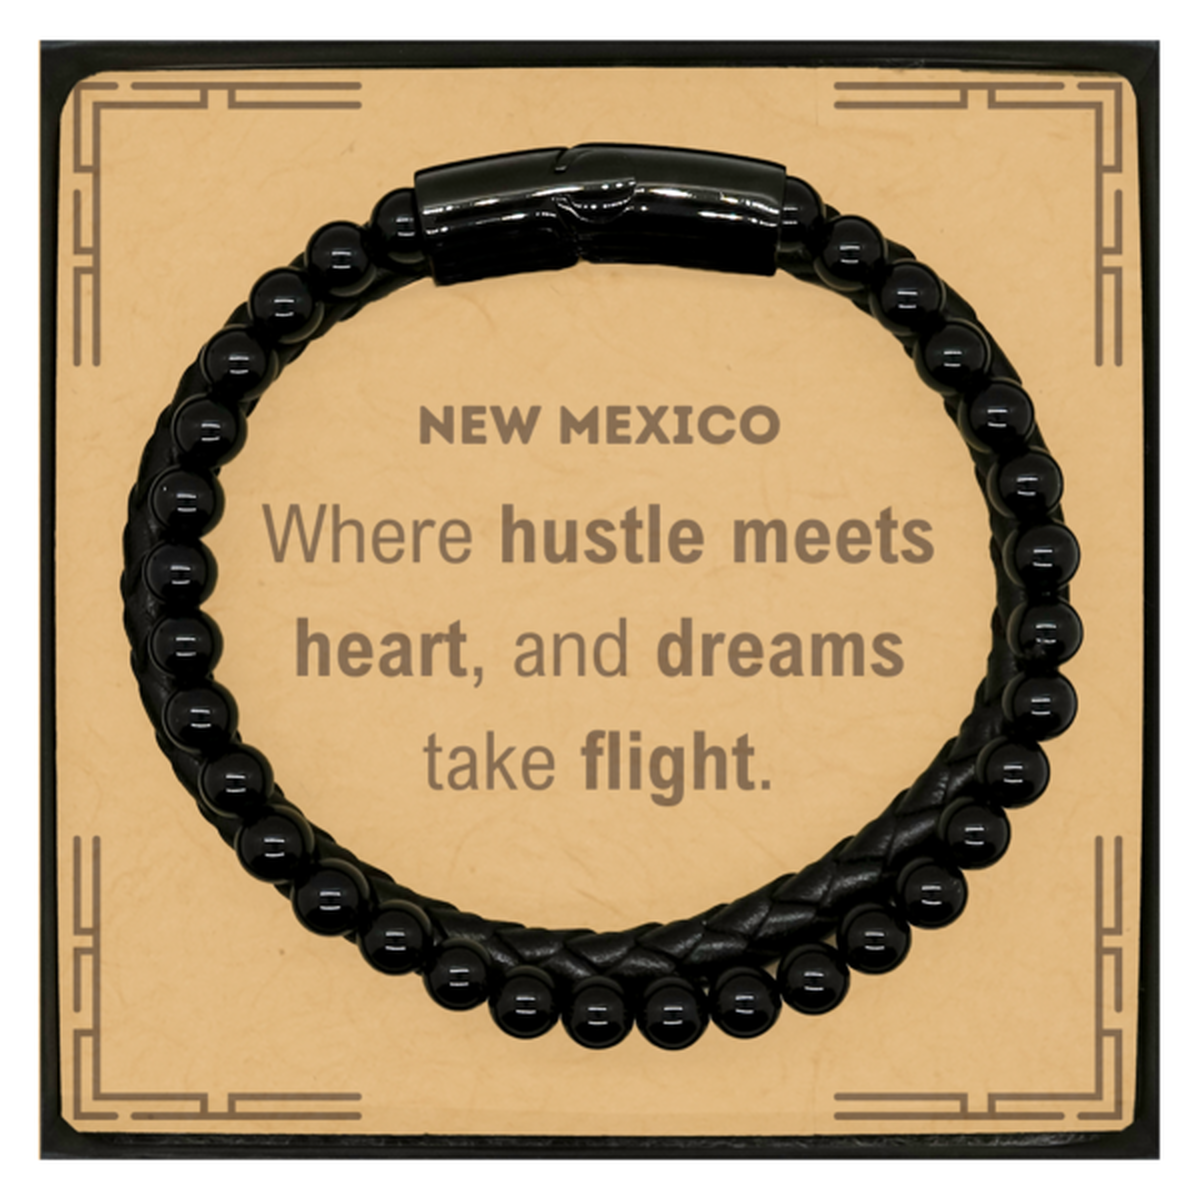 New Mexico: Where hustle meets heart, and dreams take flight, New Mexico Card Gifts, Proud New Mexico Christmas Birthday New Mexico Stone Leather Bracelets, New Mexico State People, Men, Women, Friends